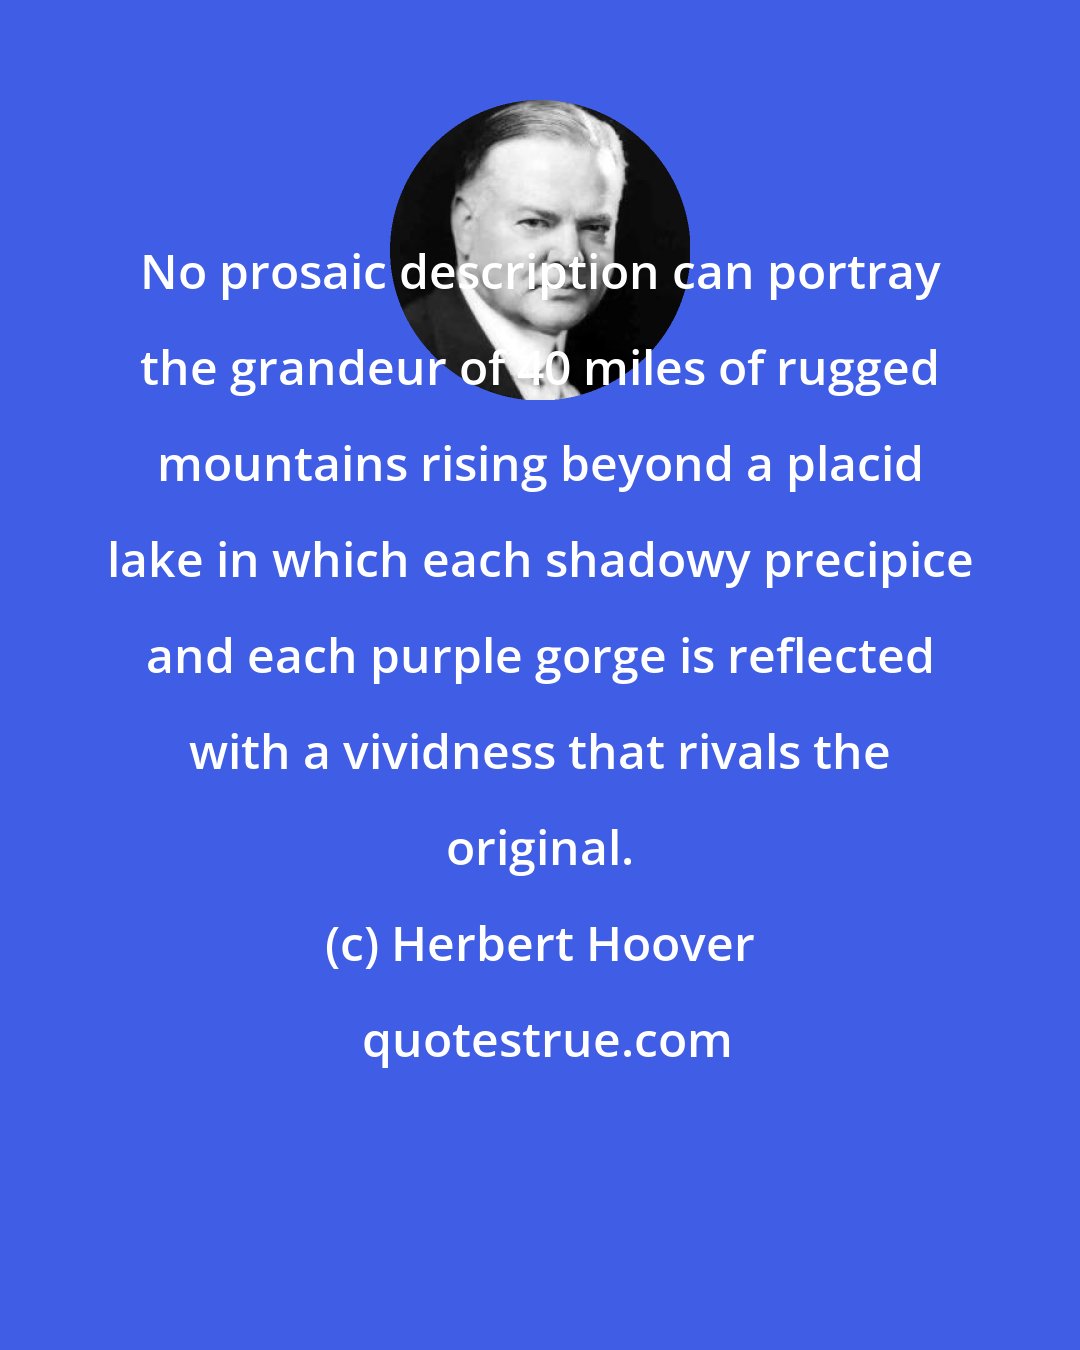 Herbert Hoover: No prosaic description can portray the grandeur of 40 miles of rugged mountains rising beyond a placid lake in which each shadowy precipice and each purple gorge is reflected with a vividness that rivals the original.